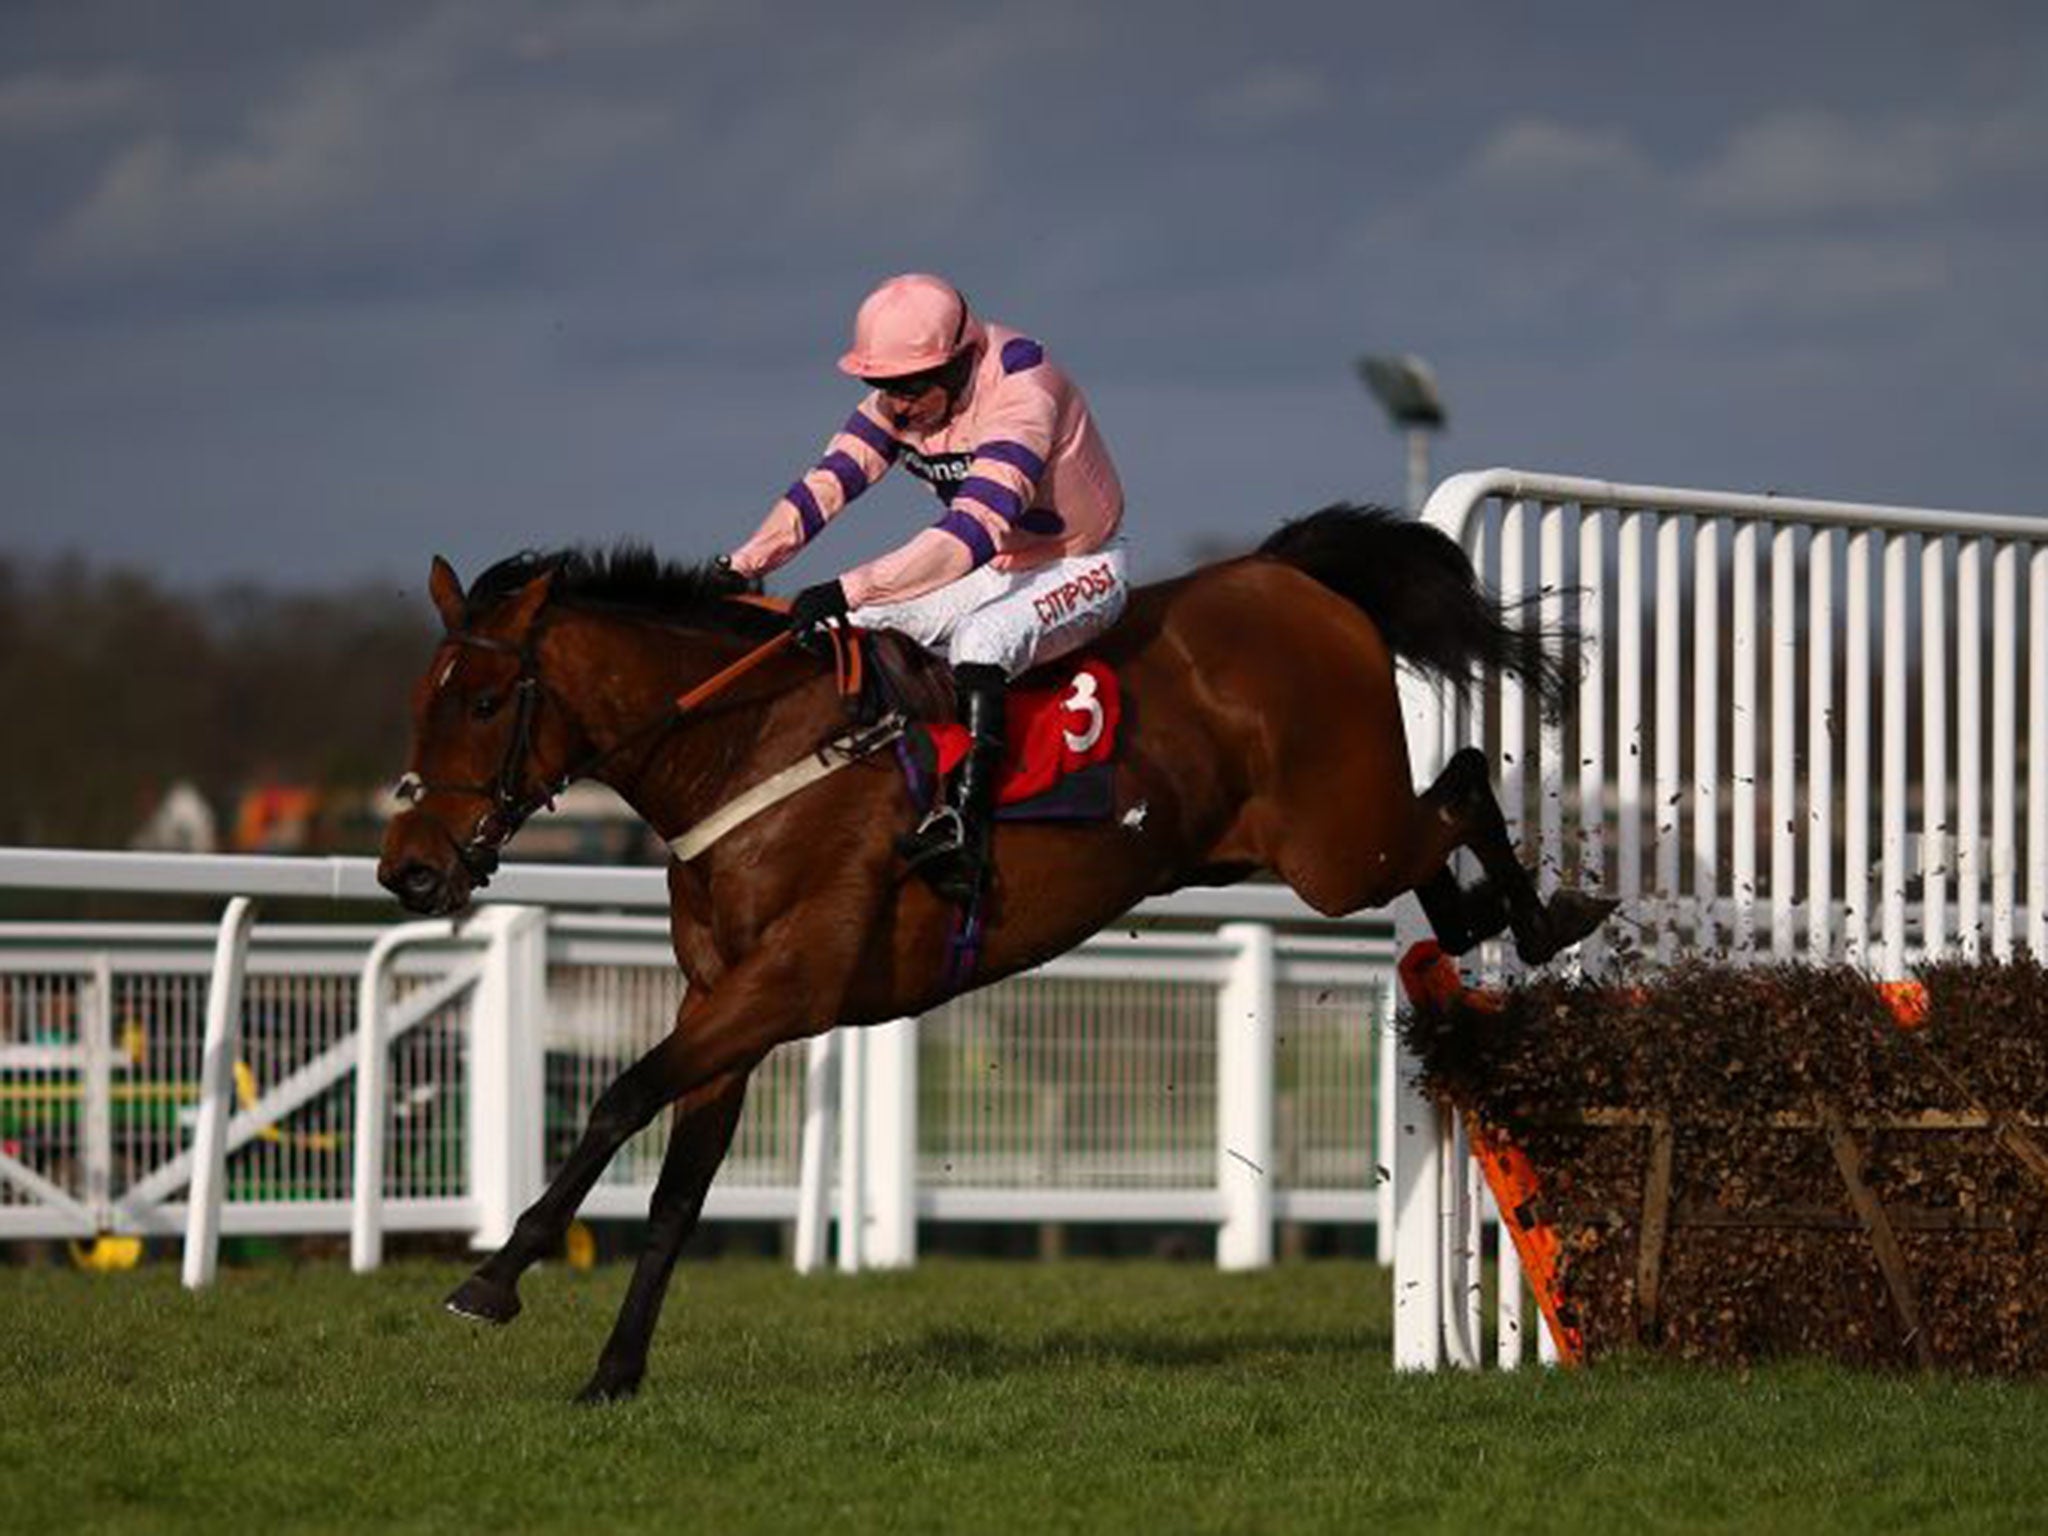 Jessber’s Dream clears the last under Noel Fehily to win the Grade Two Jane Seymour Mares’ Novices Hurdle at Sandown